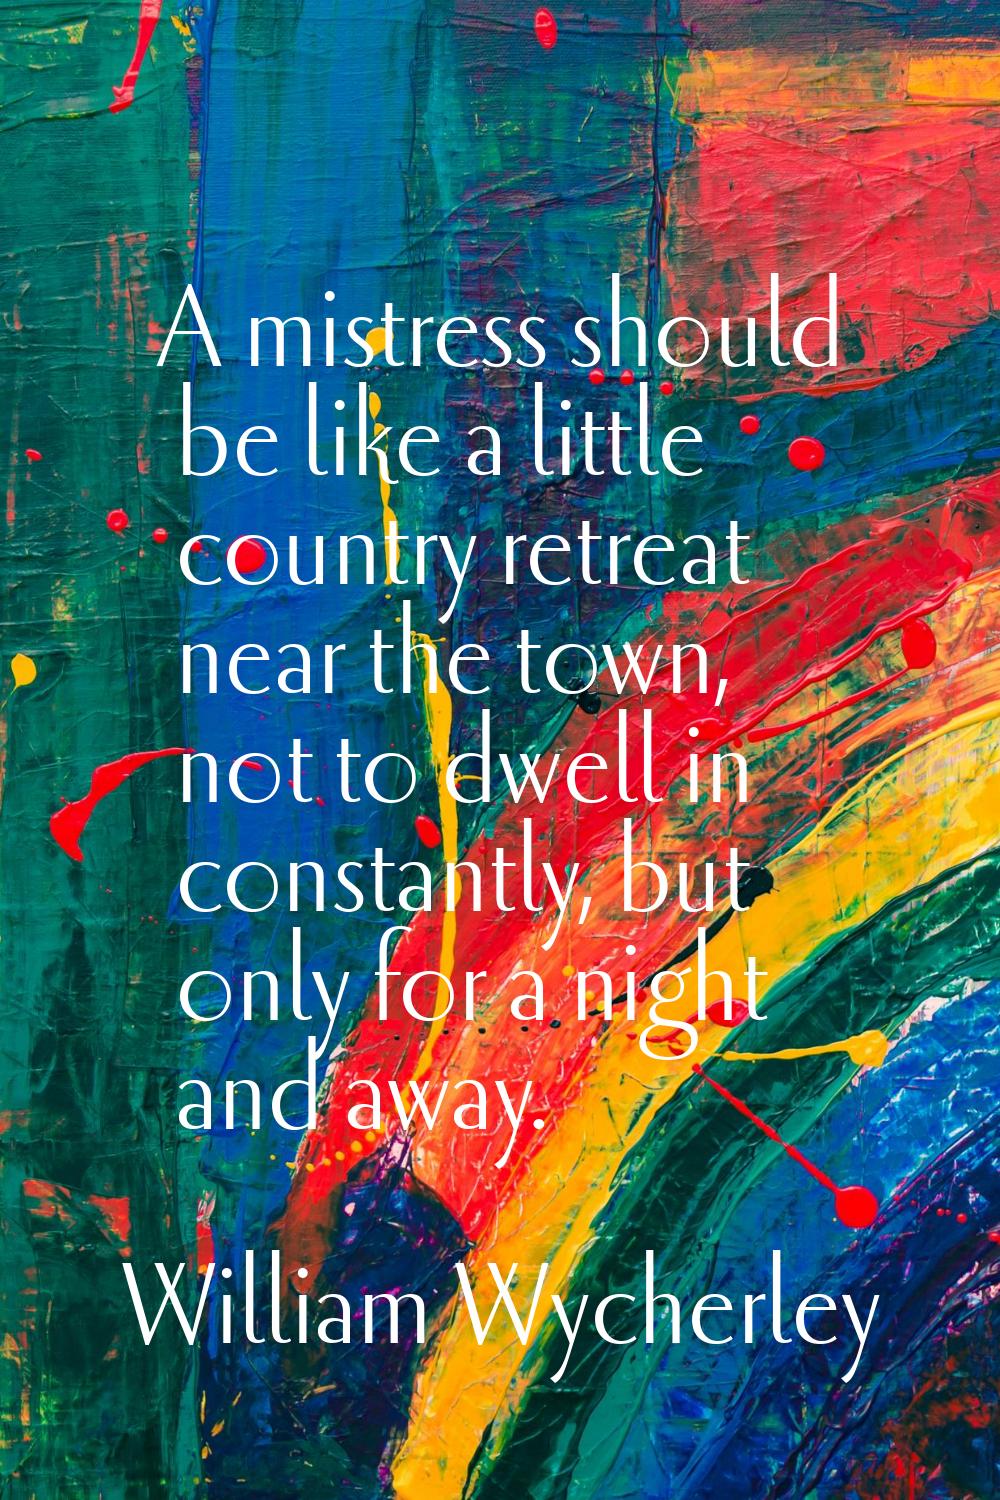 A mistress should be like a little country retreat near the town, not to dwell in constantly, but o